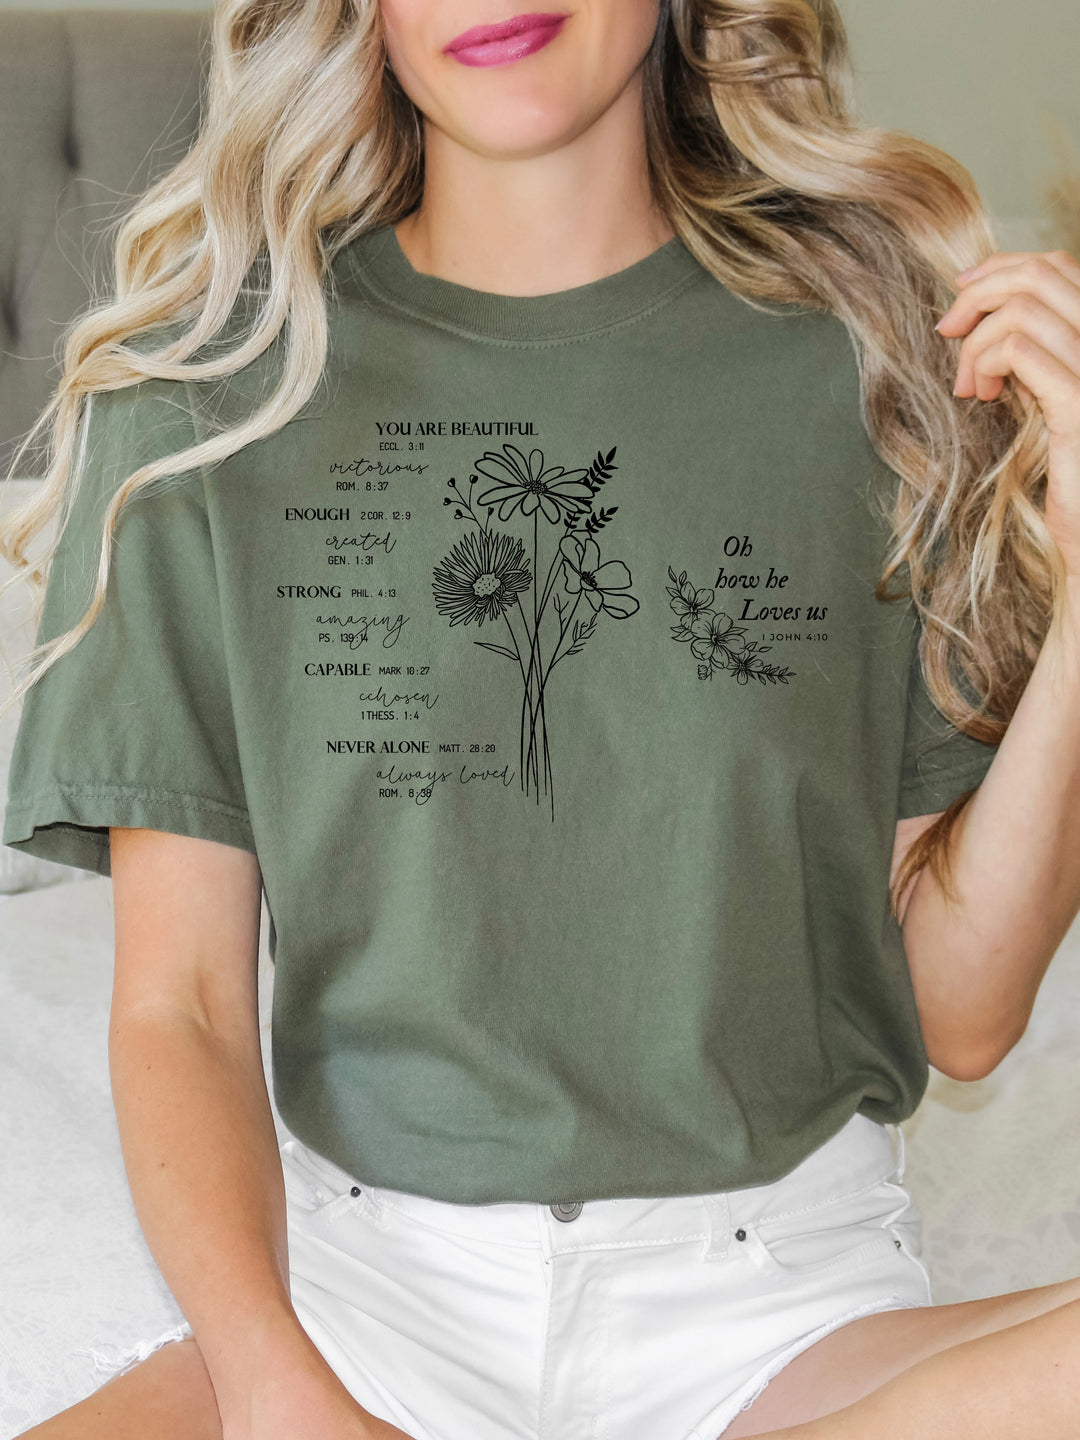 Glamfox - You Are Beautiful Worthy Capable Graphic Tee